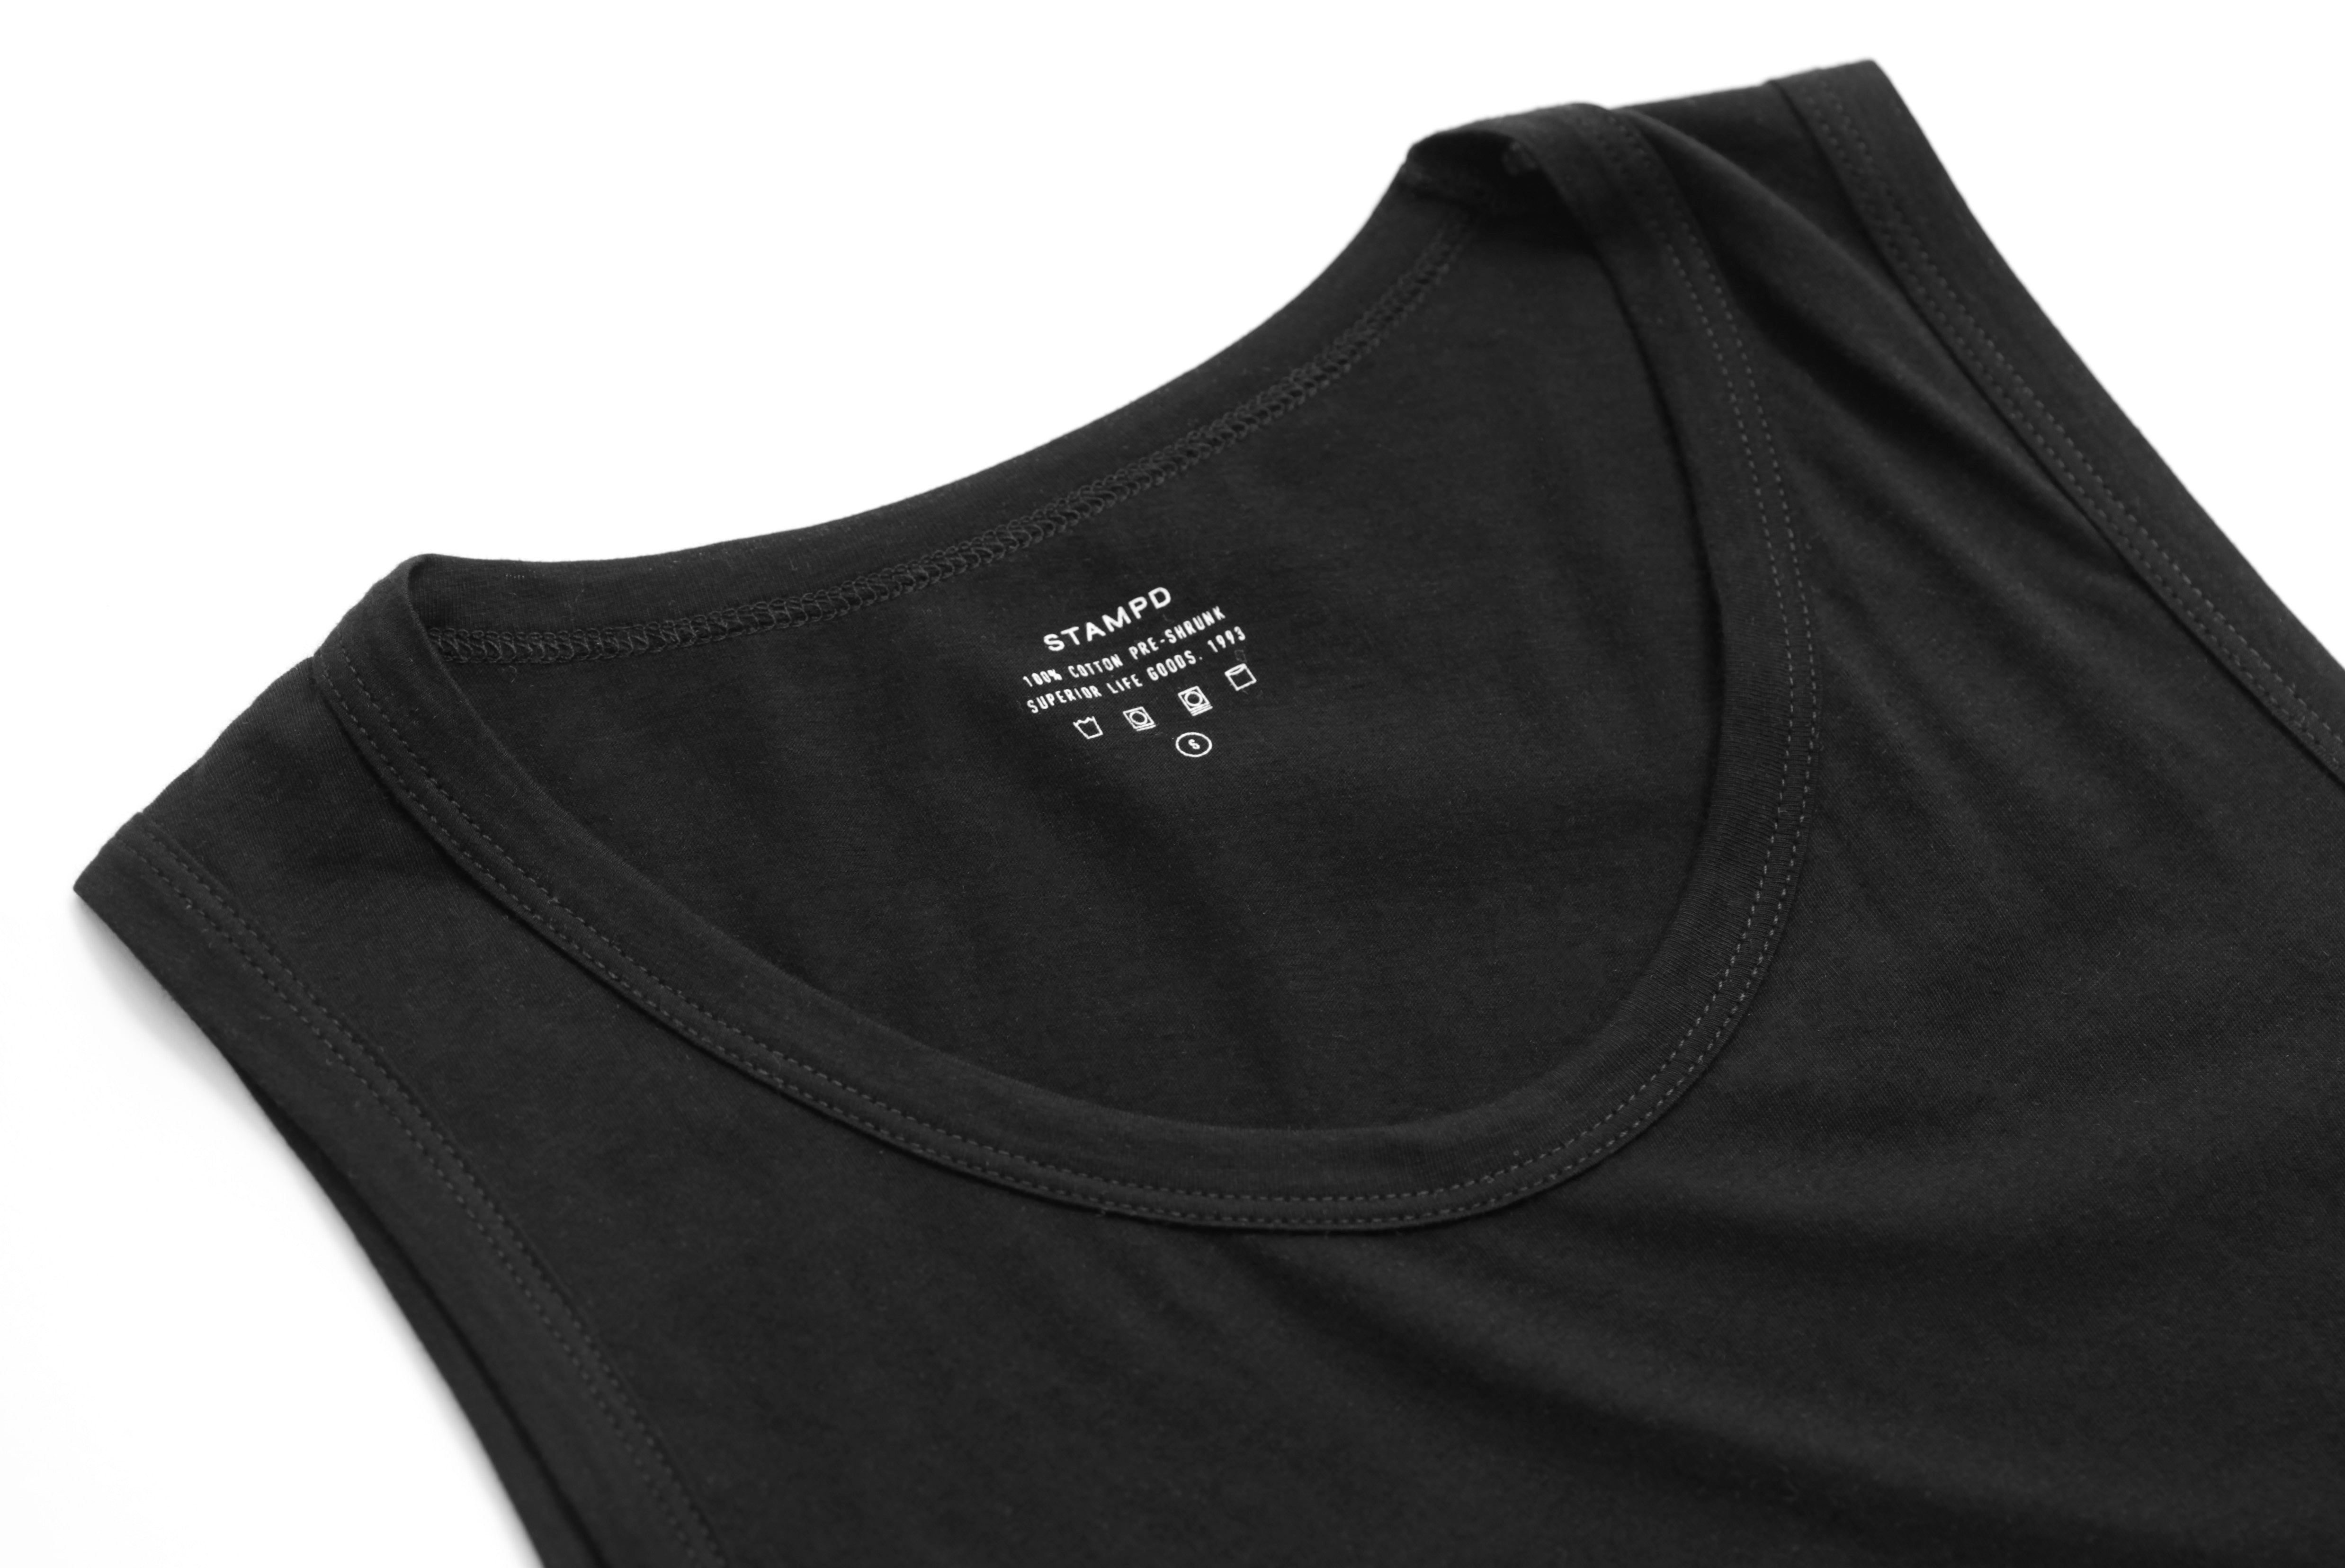 THE CAVALIER TANK – Stampd